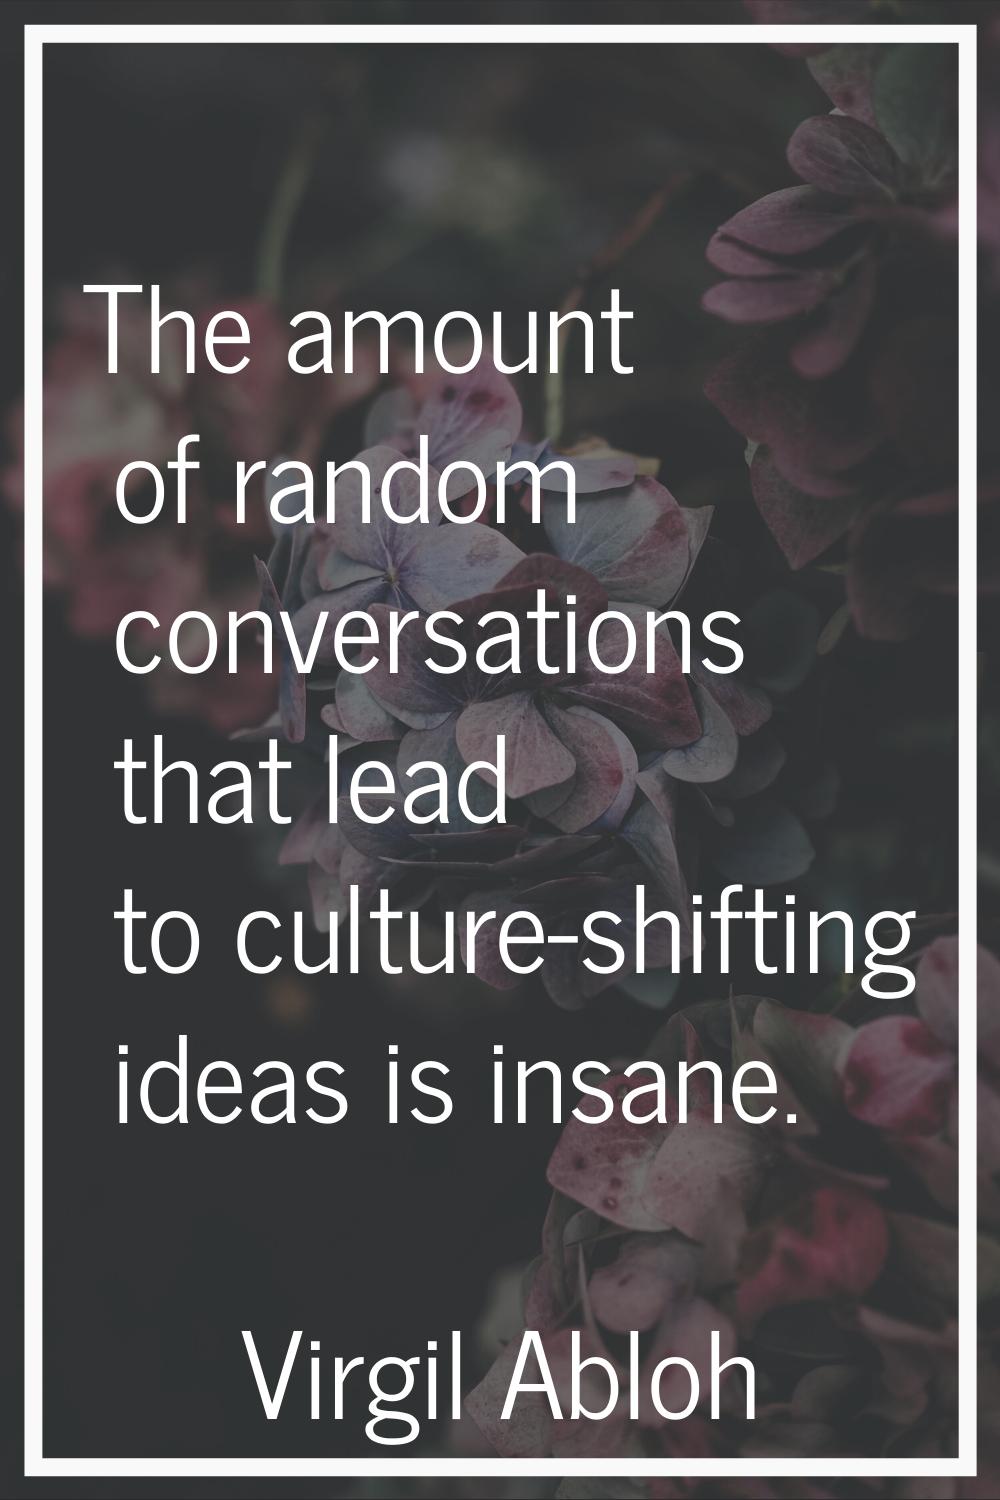 The amount of random conversations that lead to culture-shifting ideas is insane.